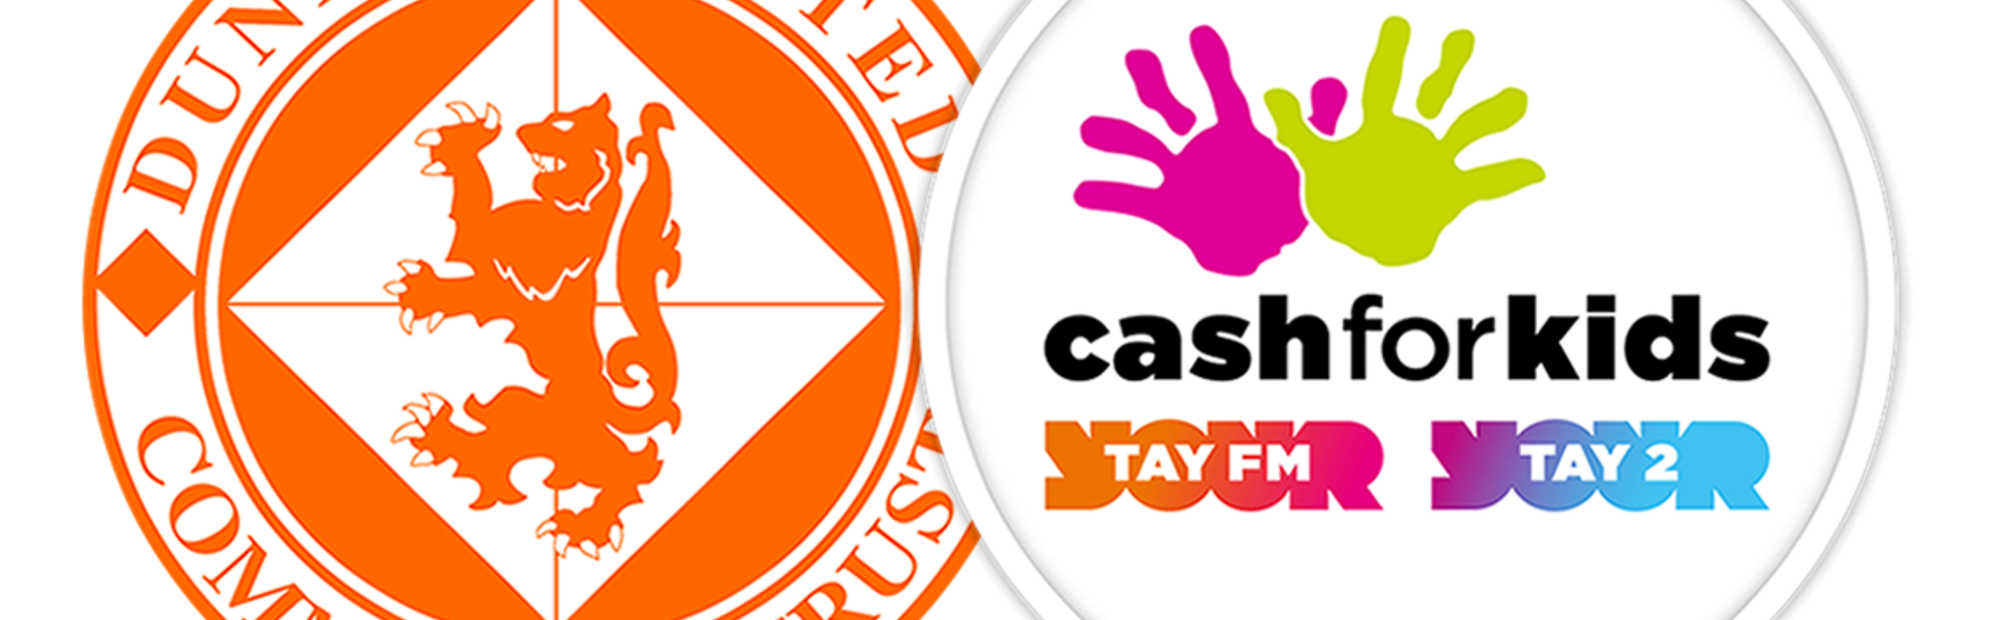 Graphic featuring Dundee United Community Trust (DUCT) and Radio Tay's Cash for Kids Charity logos